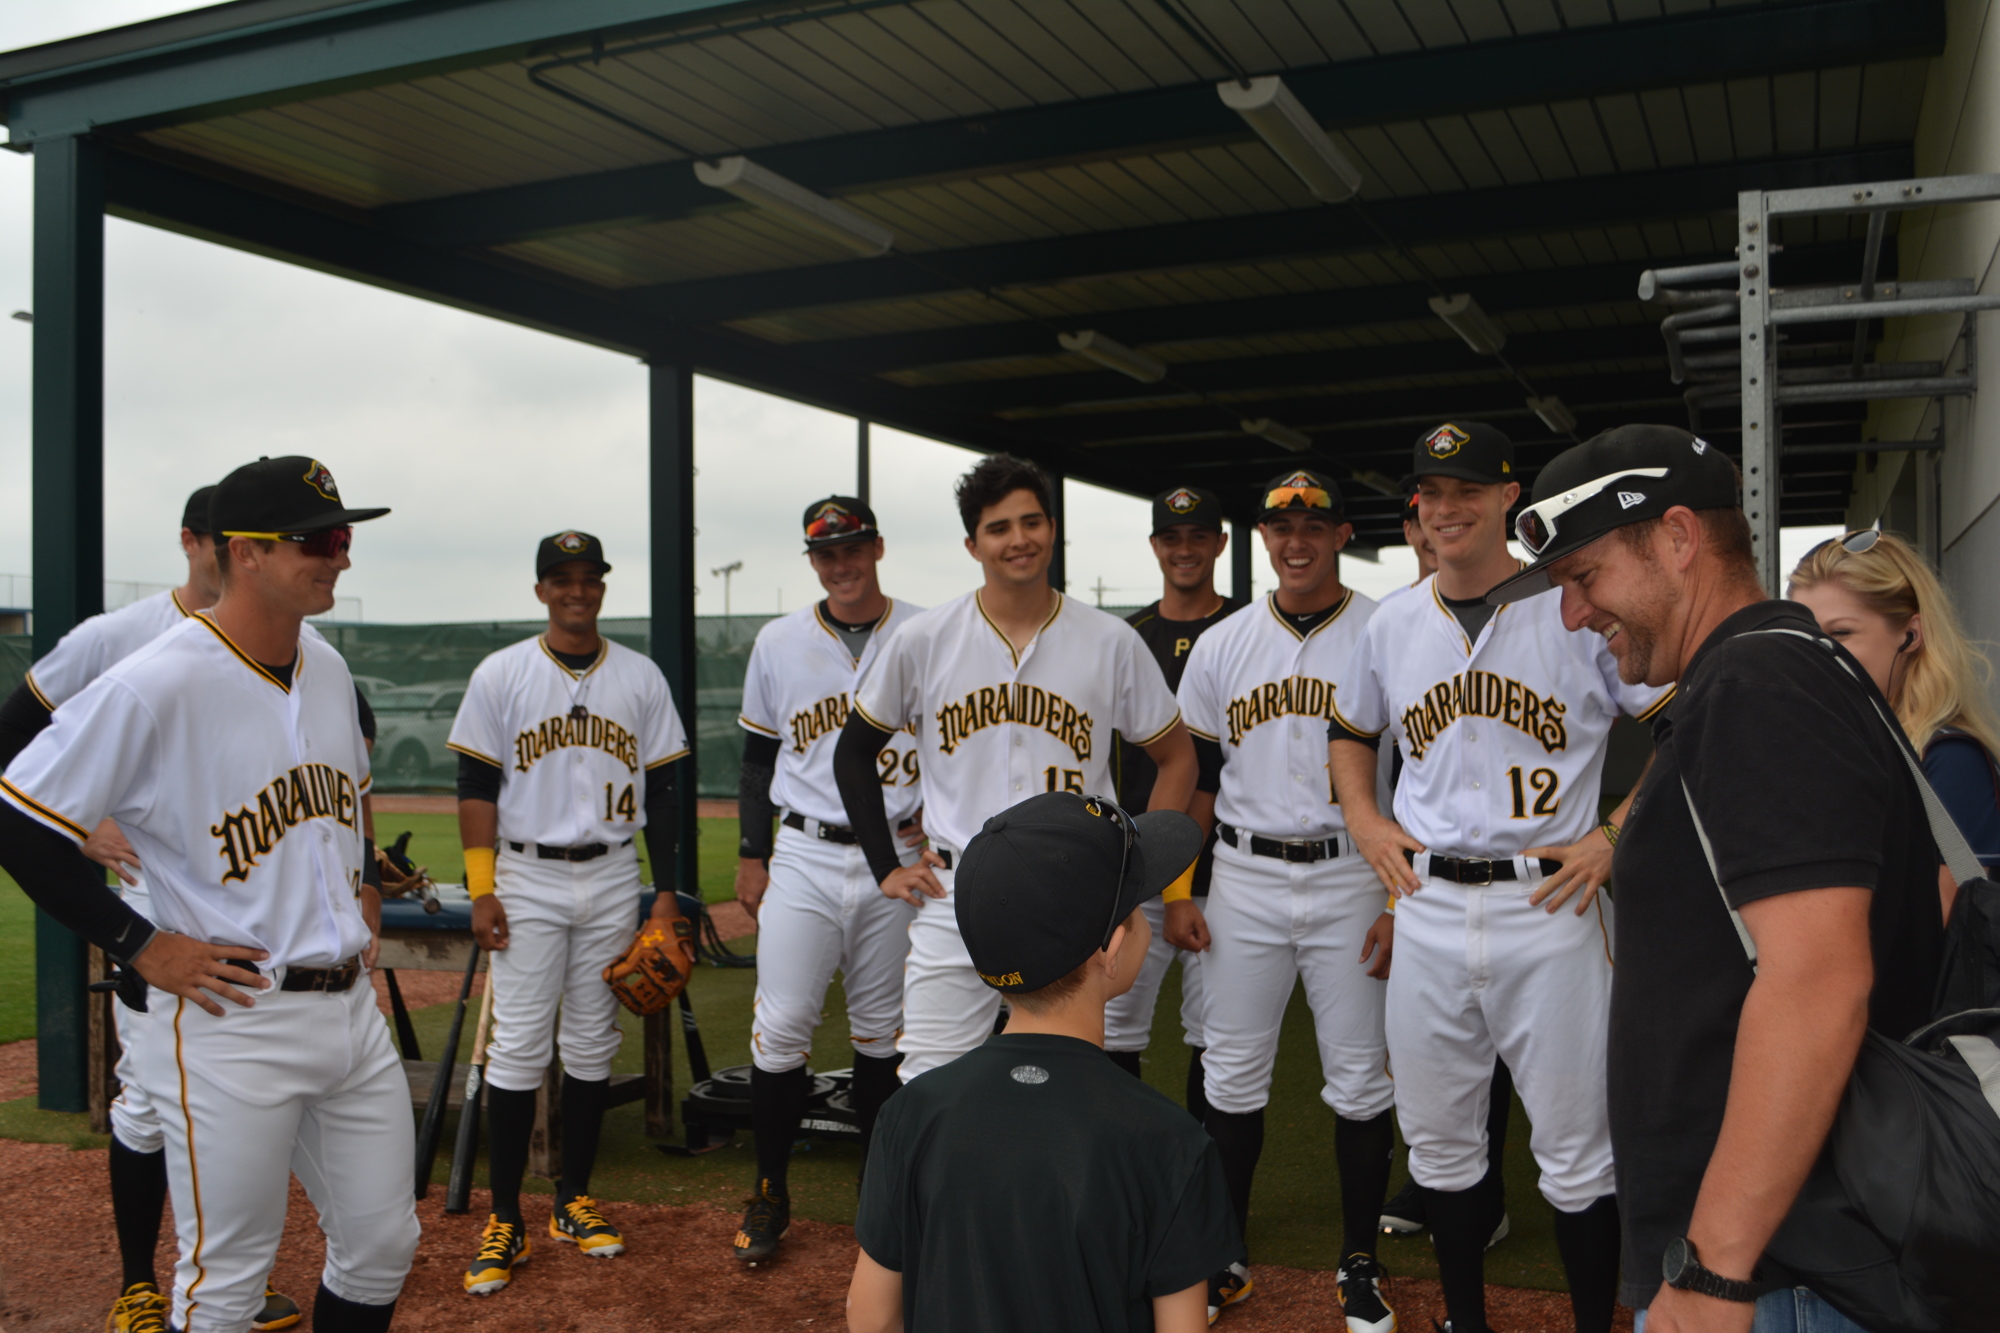 Landon Marazon was treated to a surprise visit from the Marauders at LECOM Park.